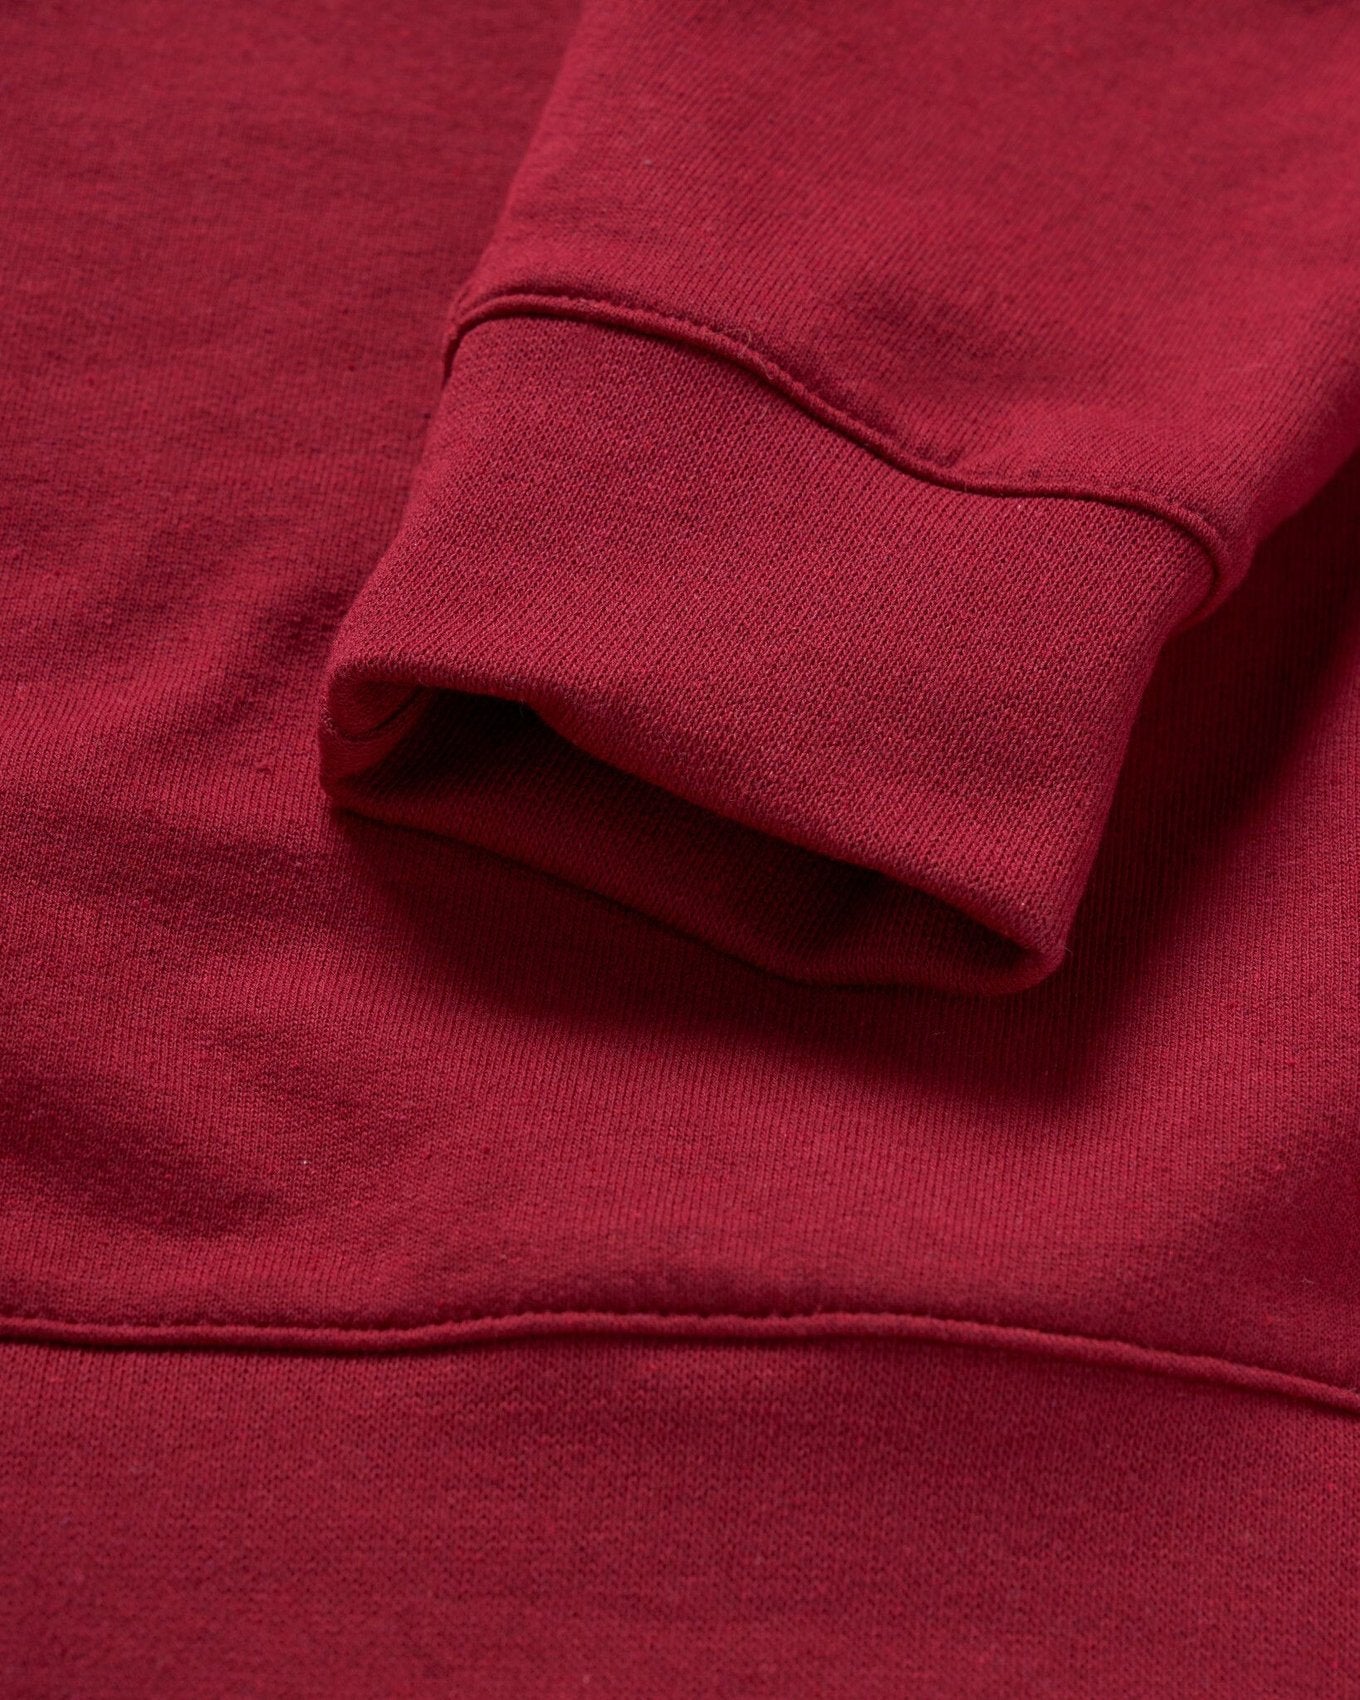 ReApparel Stand Crew Neck . in color Garnet and shape long sleeve